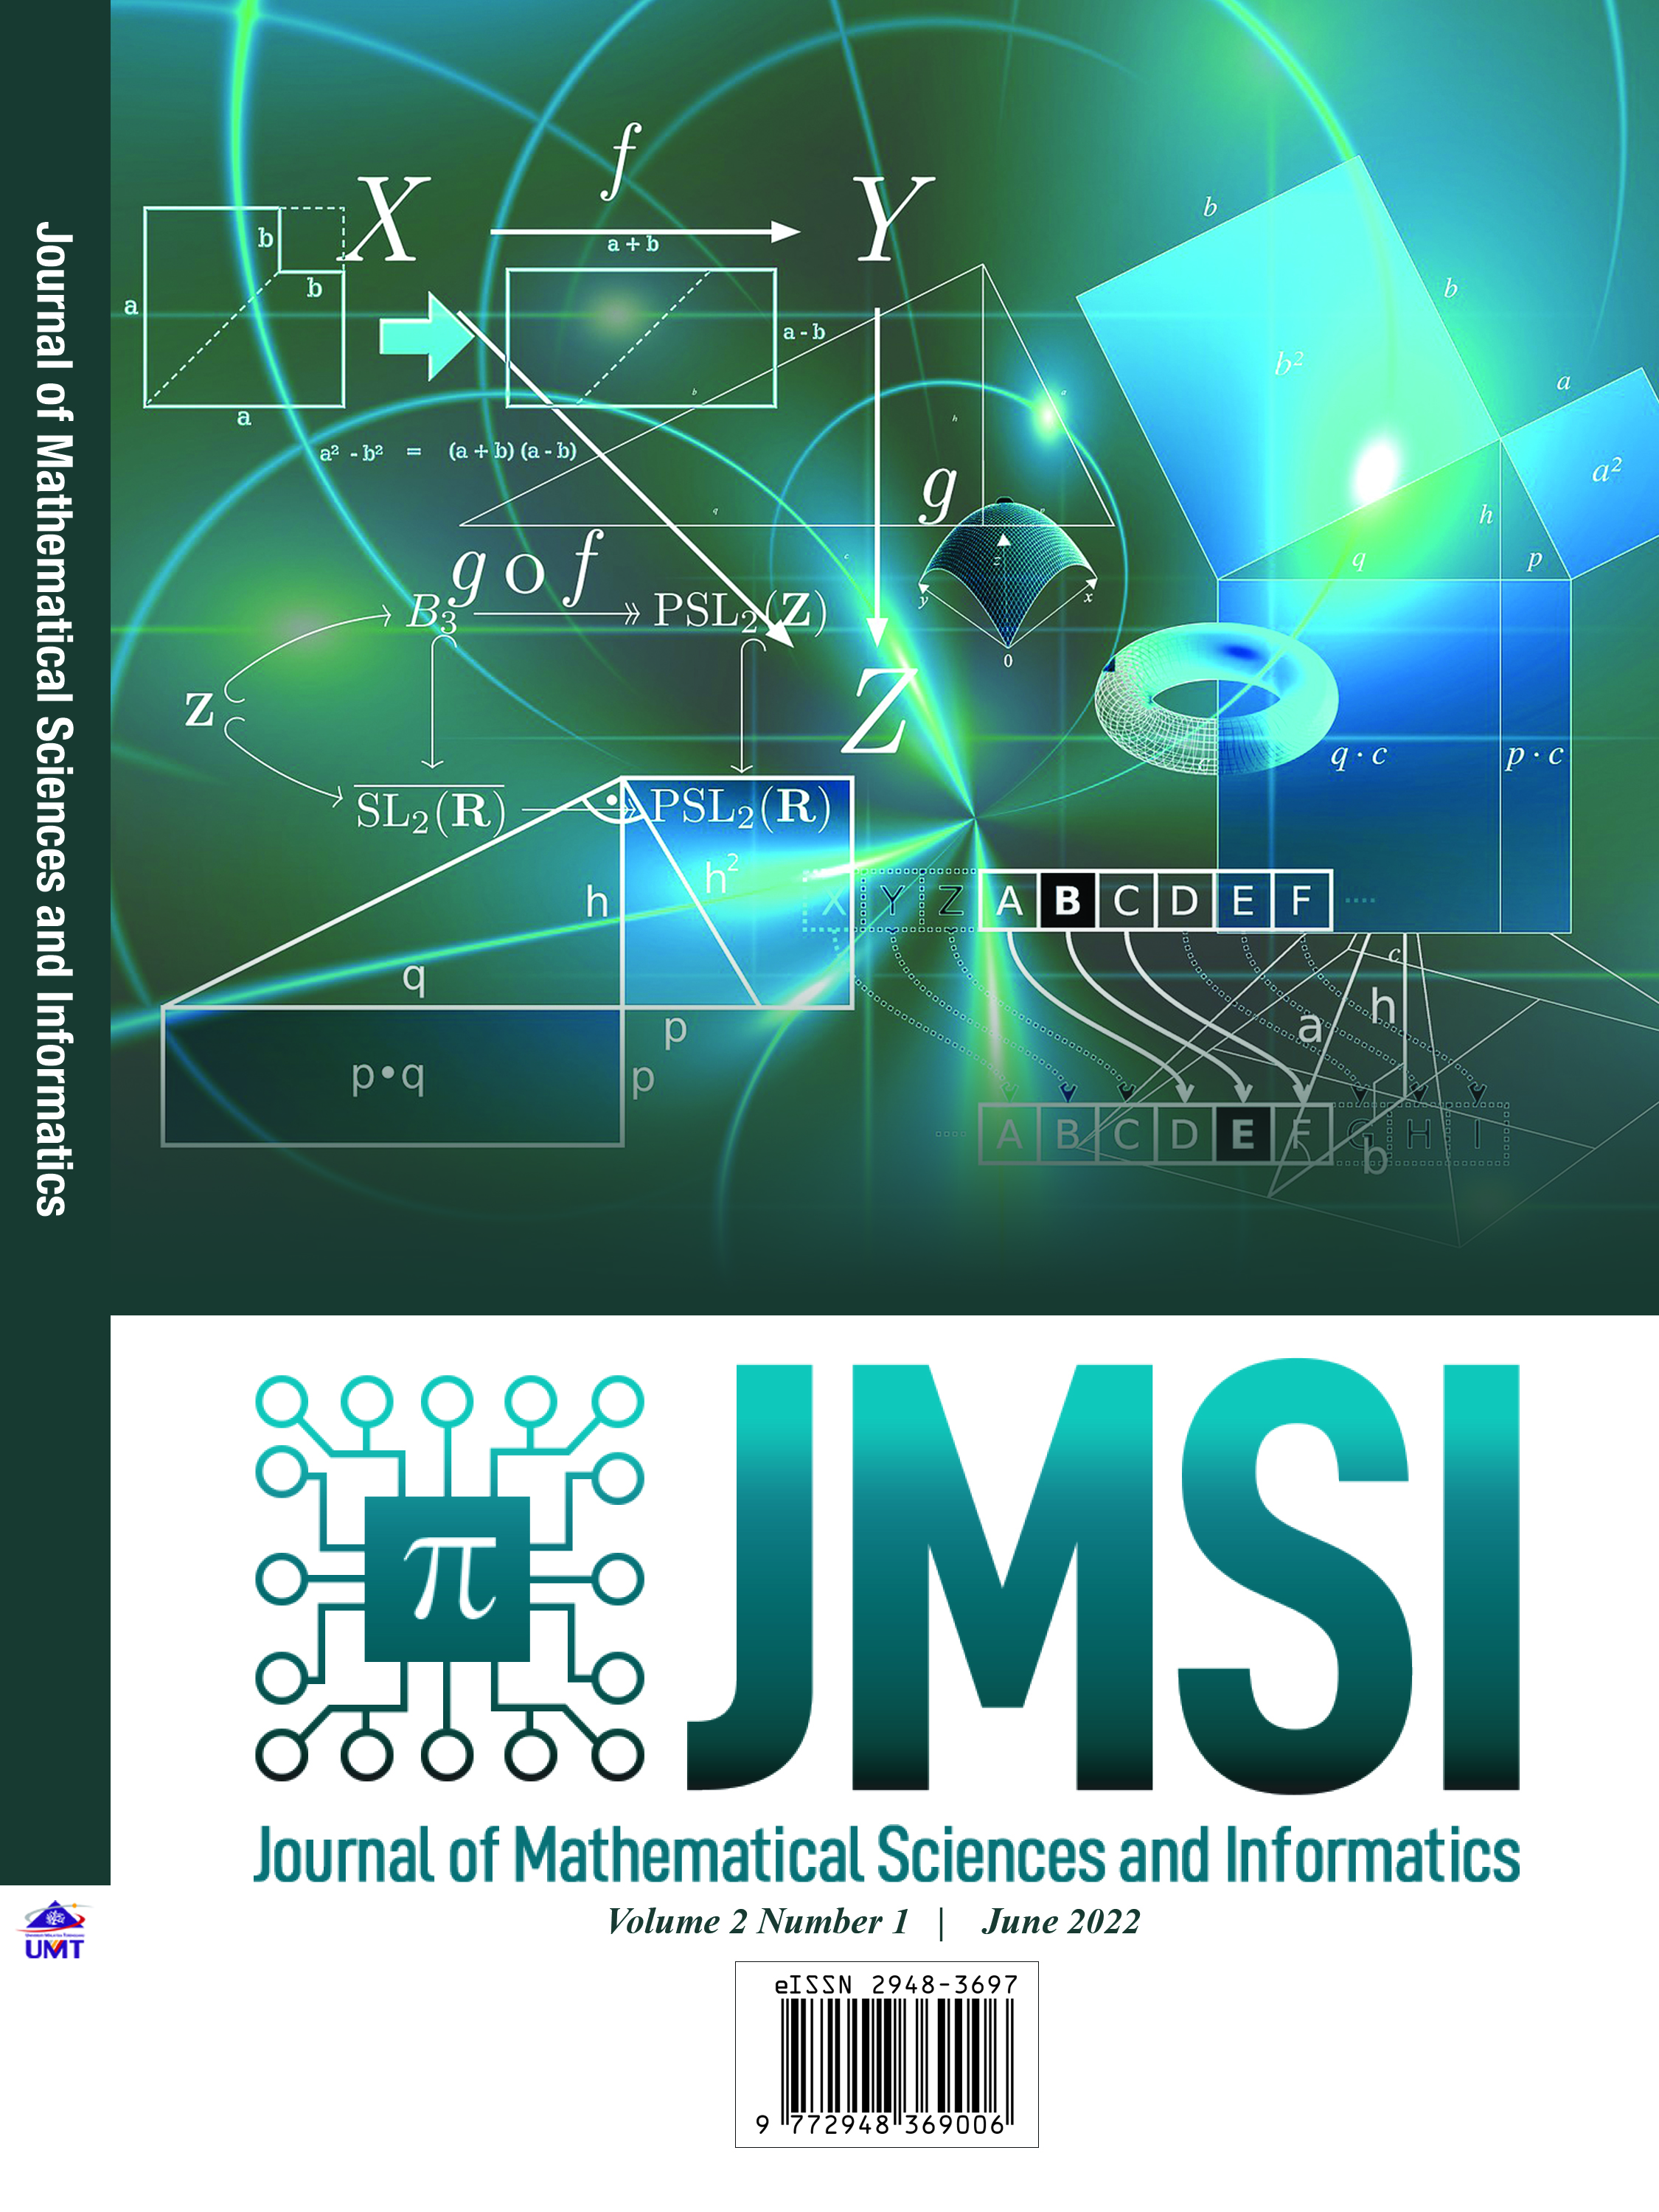 					View Vol. 2 No. 1: Journal of Mathematical Sciences and Informatics, Volume 2 Issue 1, June 2022
				